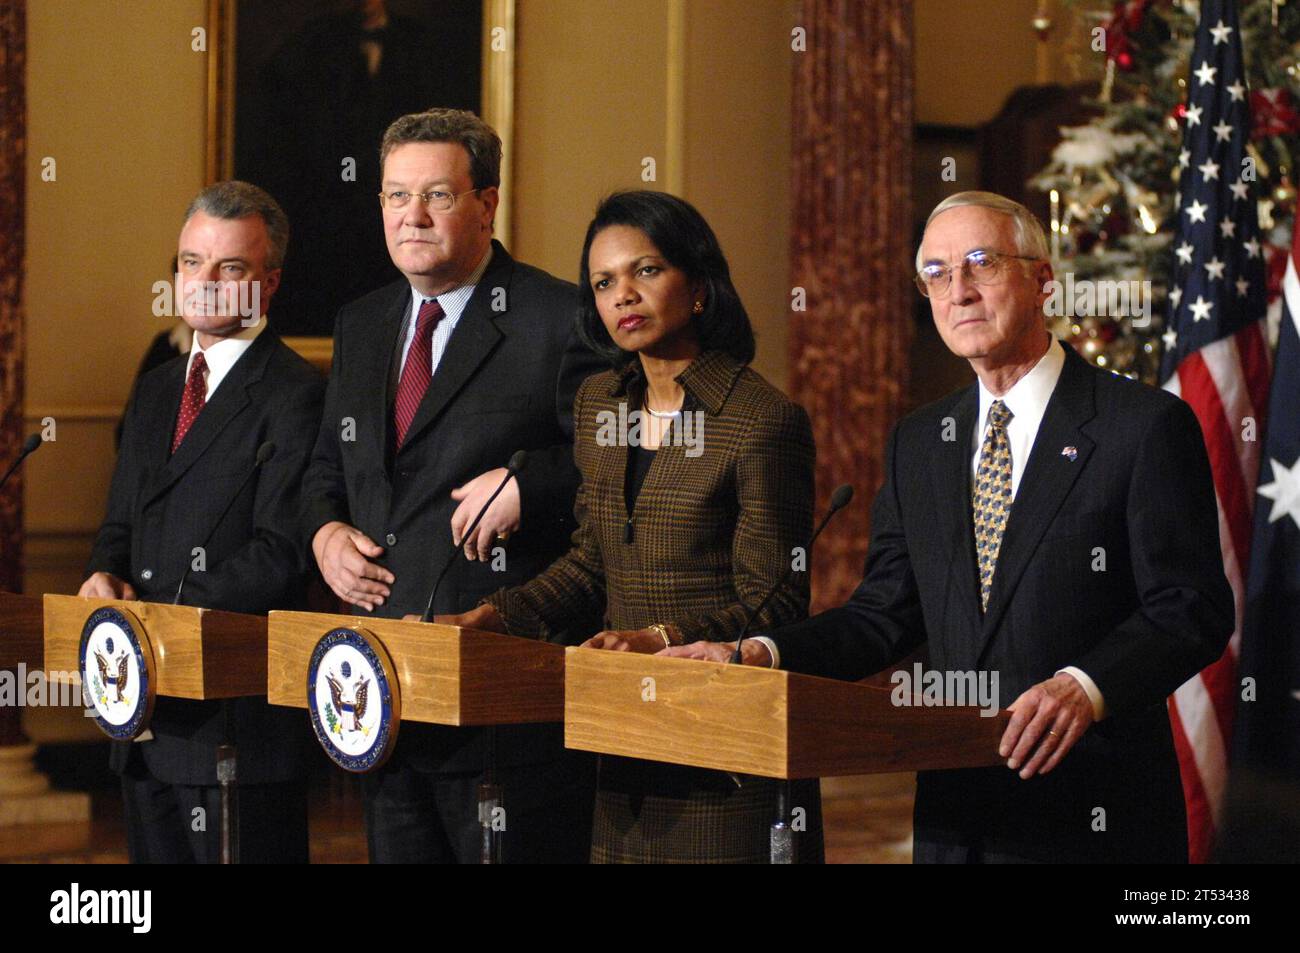 0612123642E-151  Washington, D.C. (Dec. 12, 2006) - Deputy Secretary of Defense Gordon England, Secretary of State Condoleezza Rice, Australian Minister for Foreign Affairs Alexander Downer and Australian Minister for Defense Brendan Nelson listen to a reporter's question. The media availability, held at the State Department's Franklin Room, wrapped up daylong U.S.-Australian bilateral ministerial meetings. During the meetings, Secretary England and Minister Nelson signed a Memorandum of Understanding on the production of the F-35 Joint Strike Fighter program. U.S. Navy Stock Photo